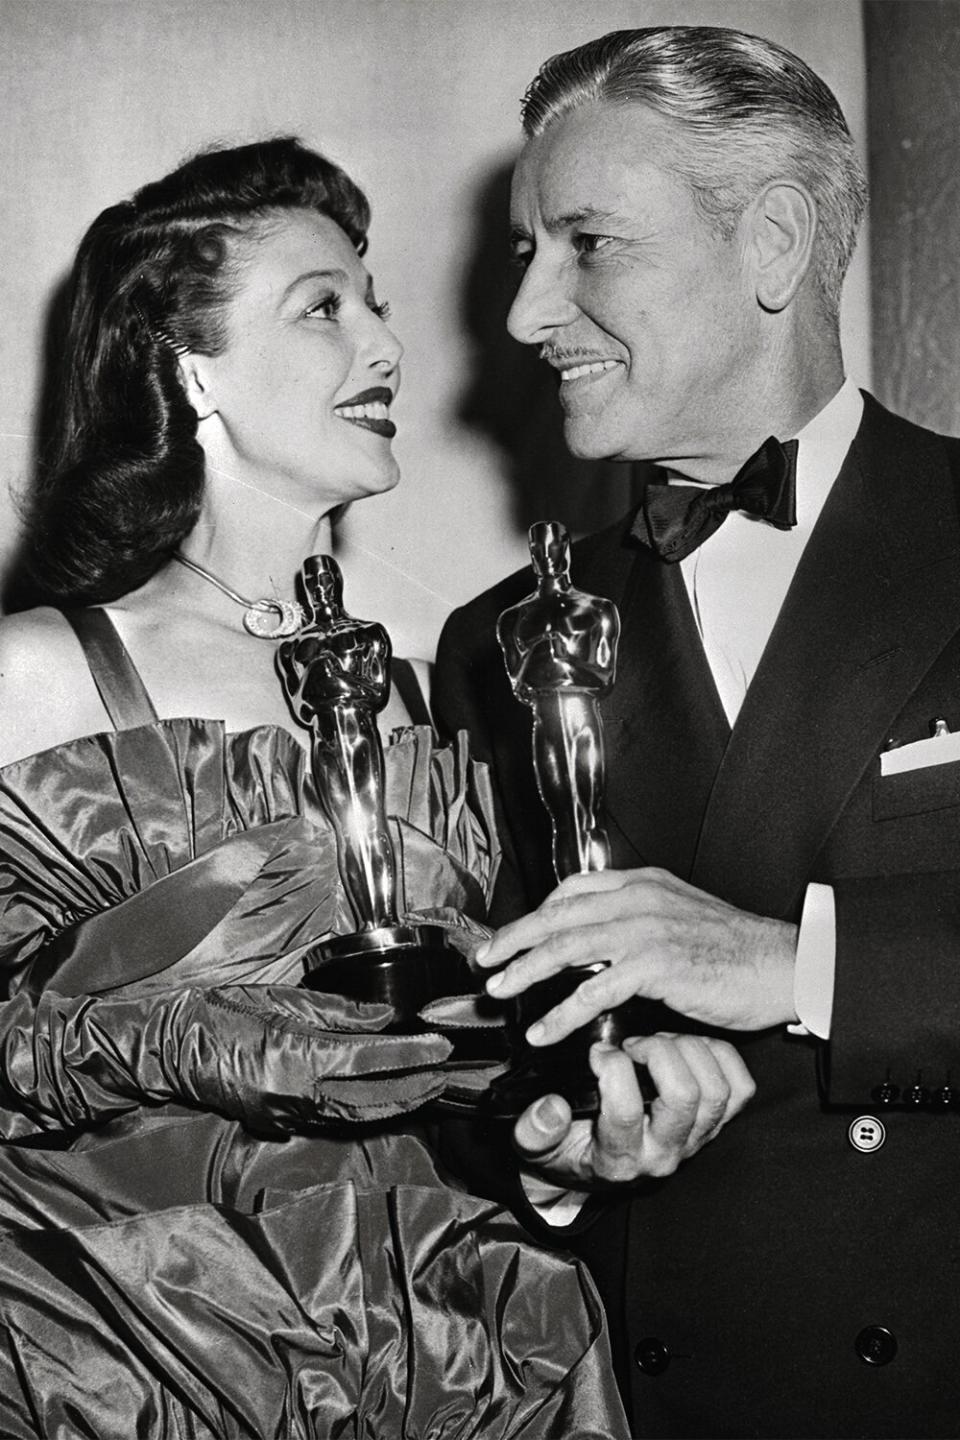 (Original Caption) Loretta Young and Ronald Colman pose with the Oscars they received as Best Actor and Actress of 1947. Miss Young received hers for her acting in The Farmer's Daughter, while Colman's acting in A Double Life earned him his Oscar.